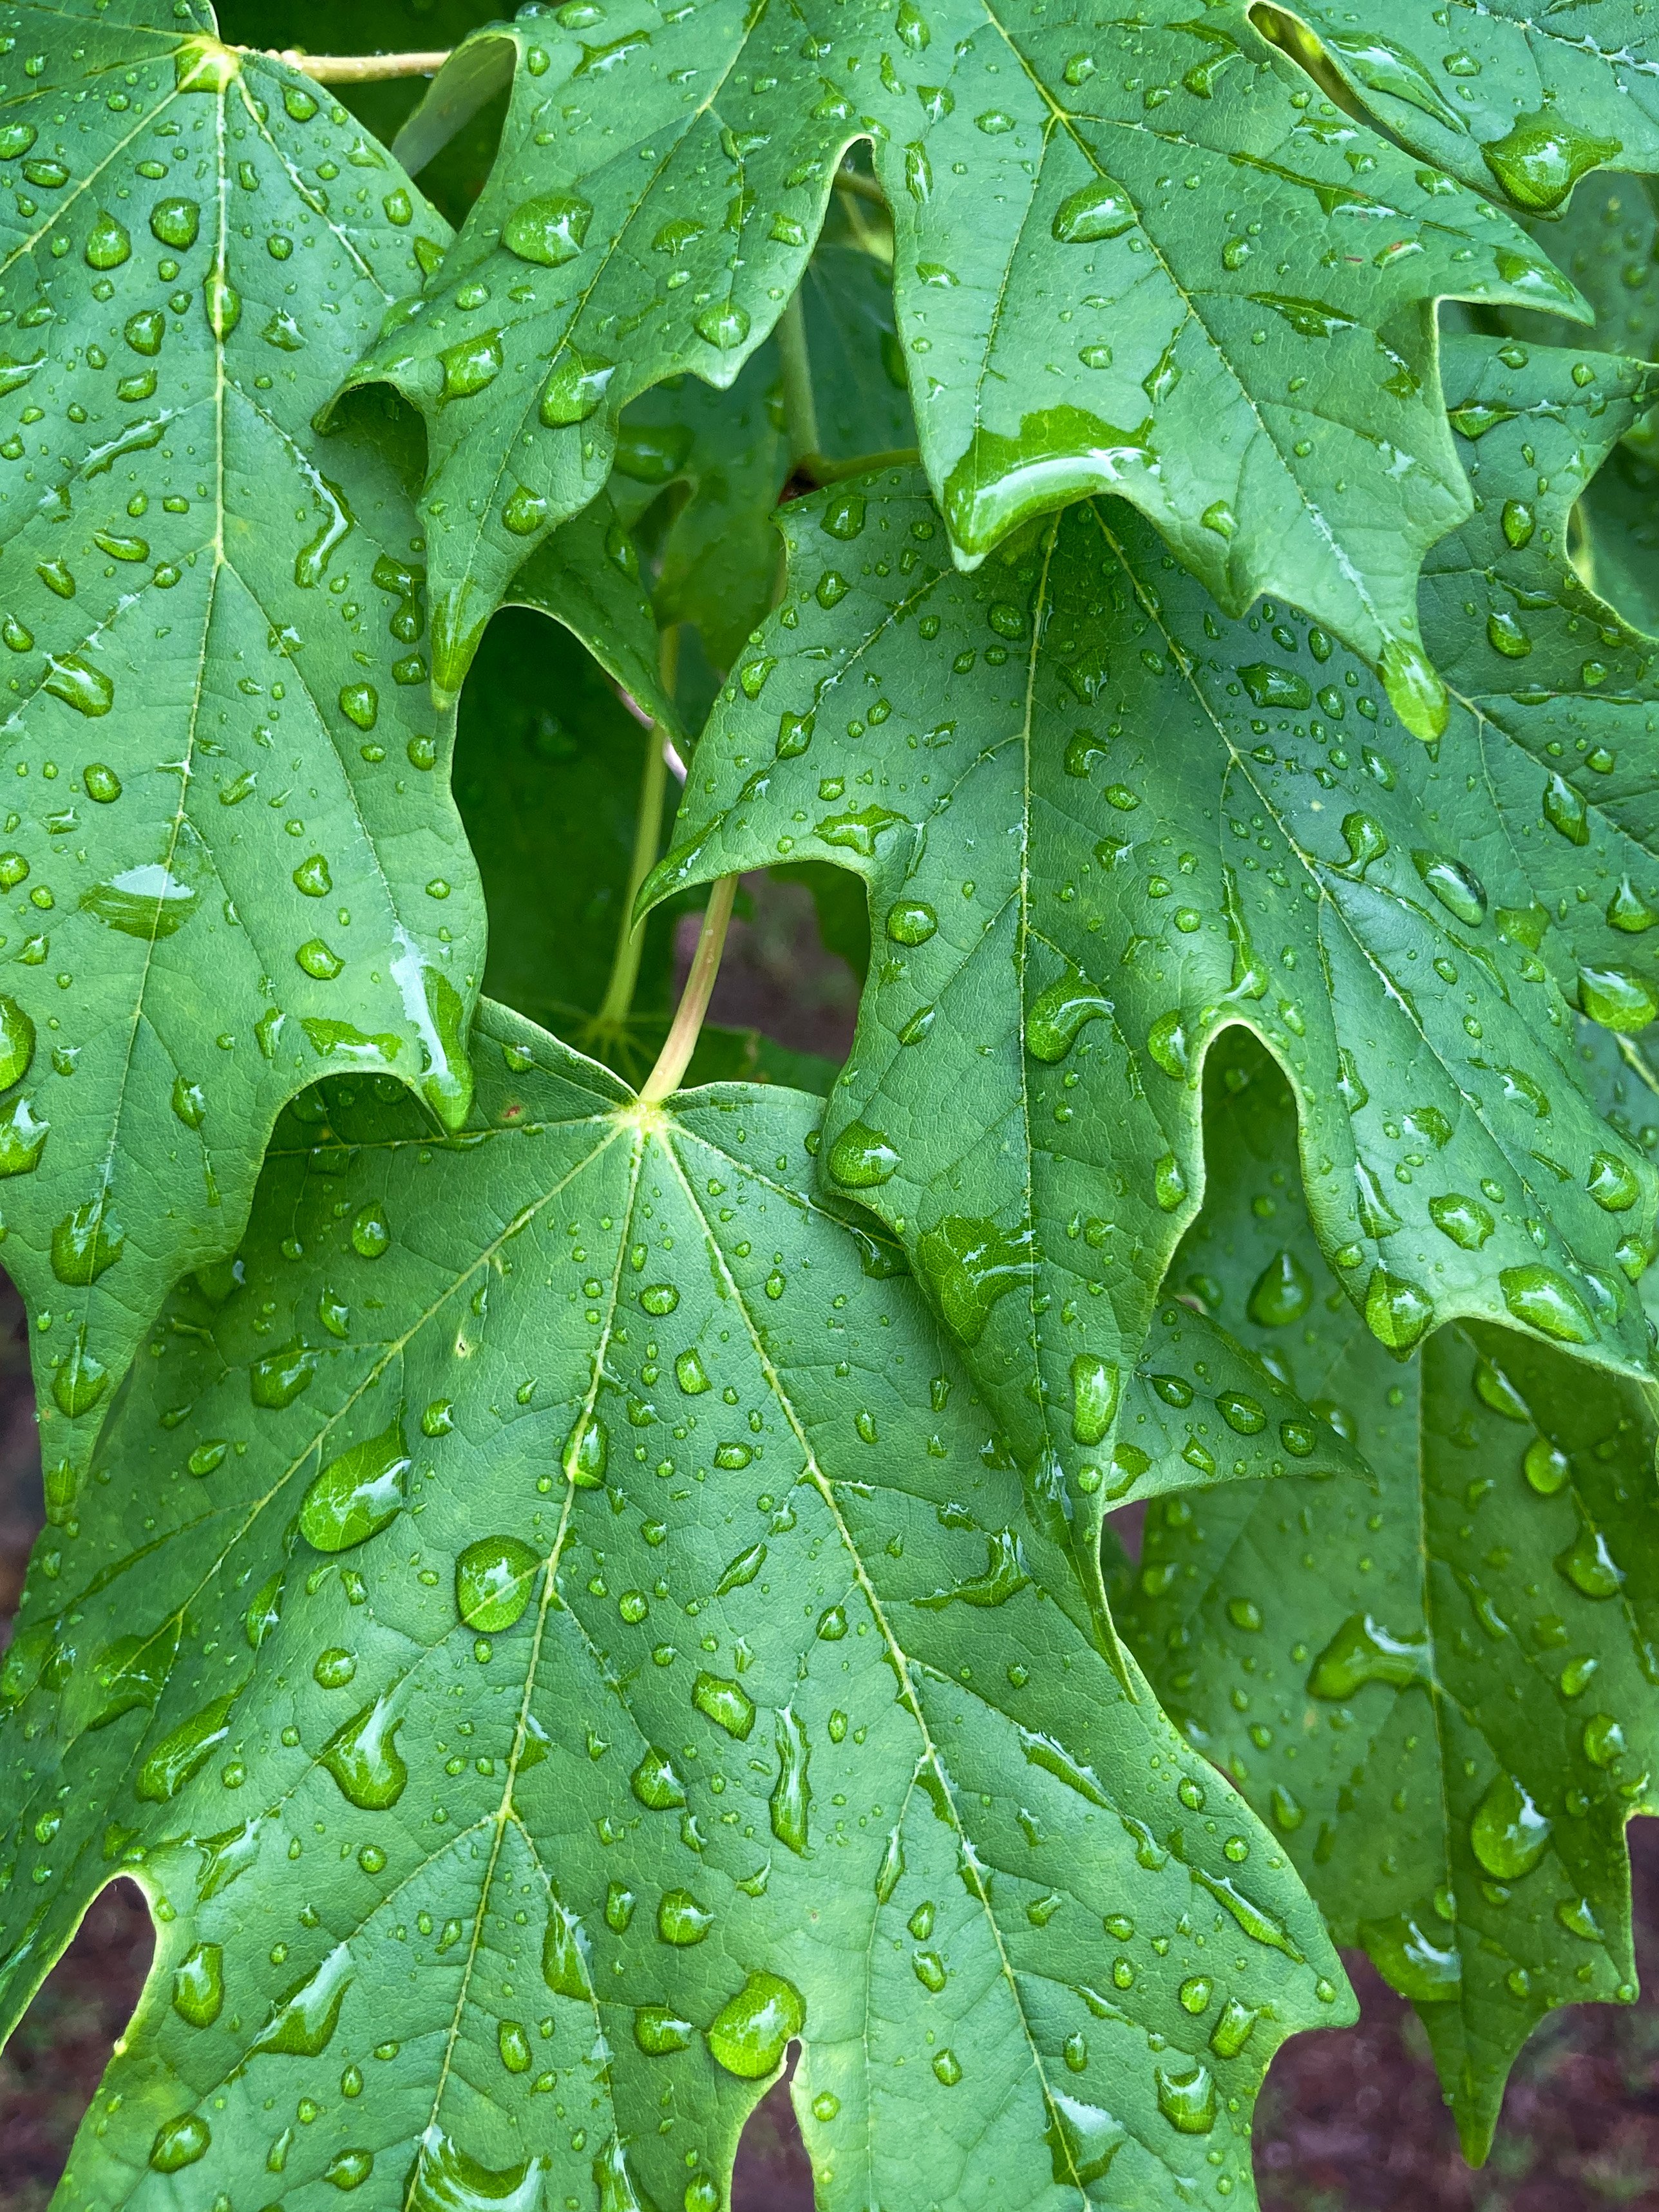 Daily Snap #9: Raindrops - Closeup of rain droplets covering green maple leaves.